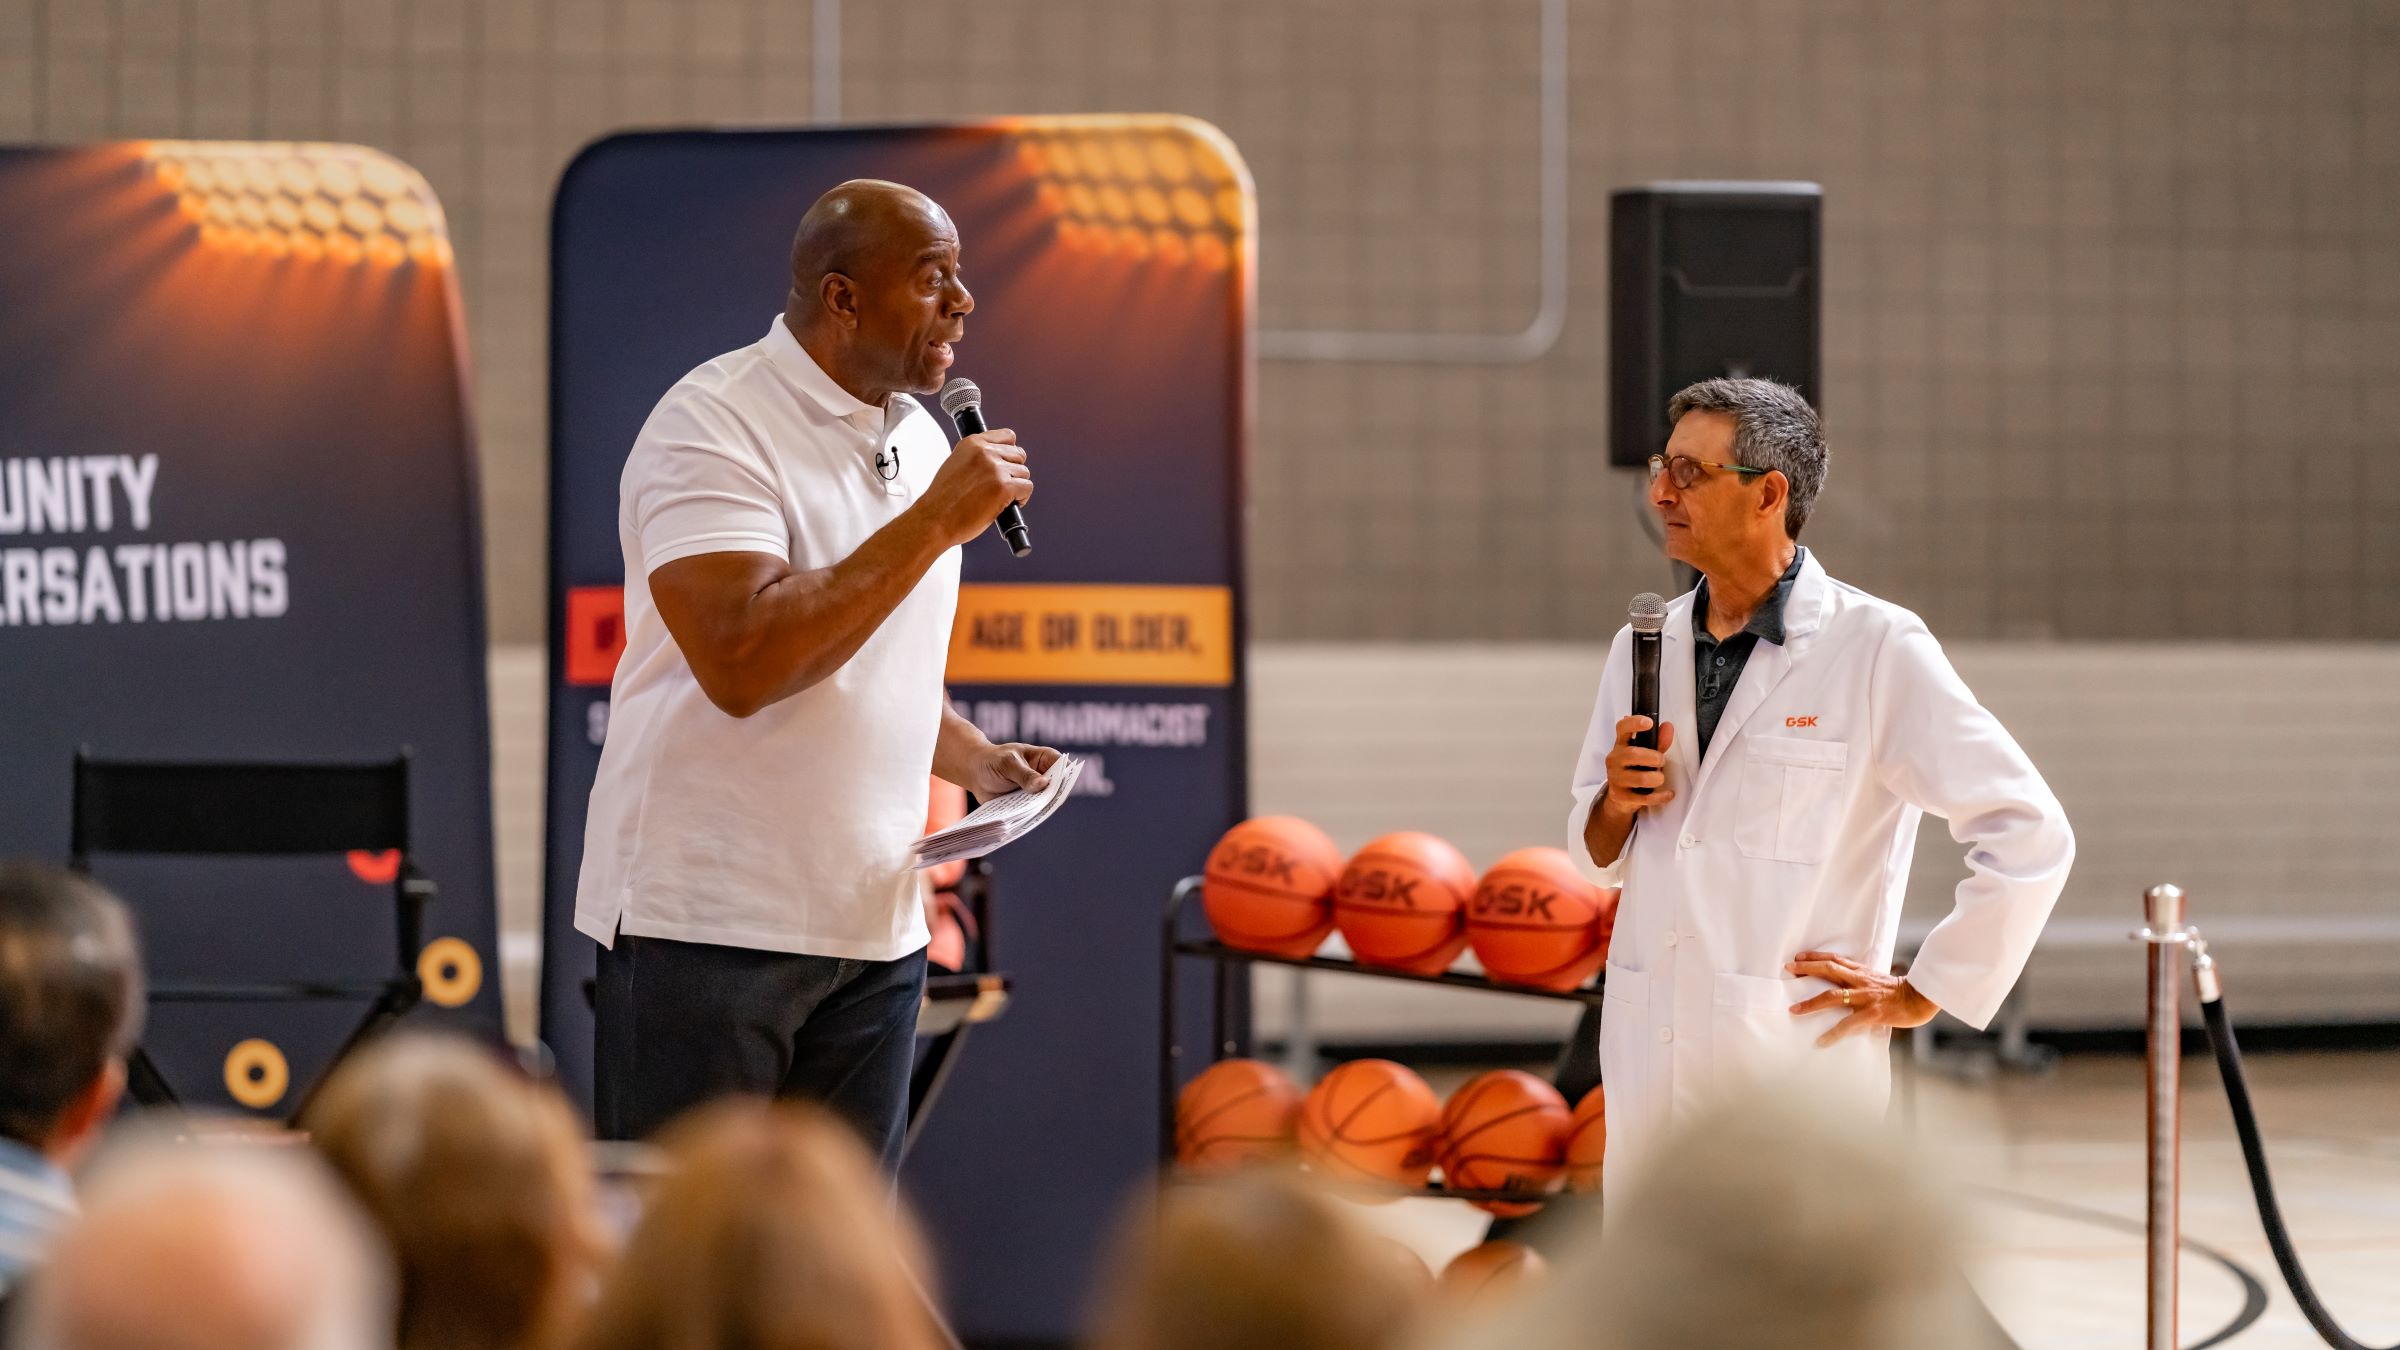 Earvin “Magic” Johnson speaking in front of the Sideline RSV audience with Dr. Len Friedland